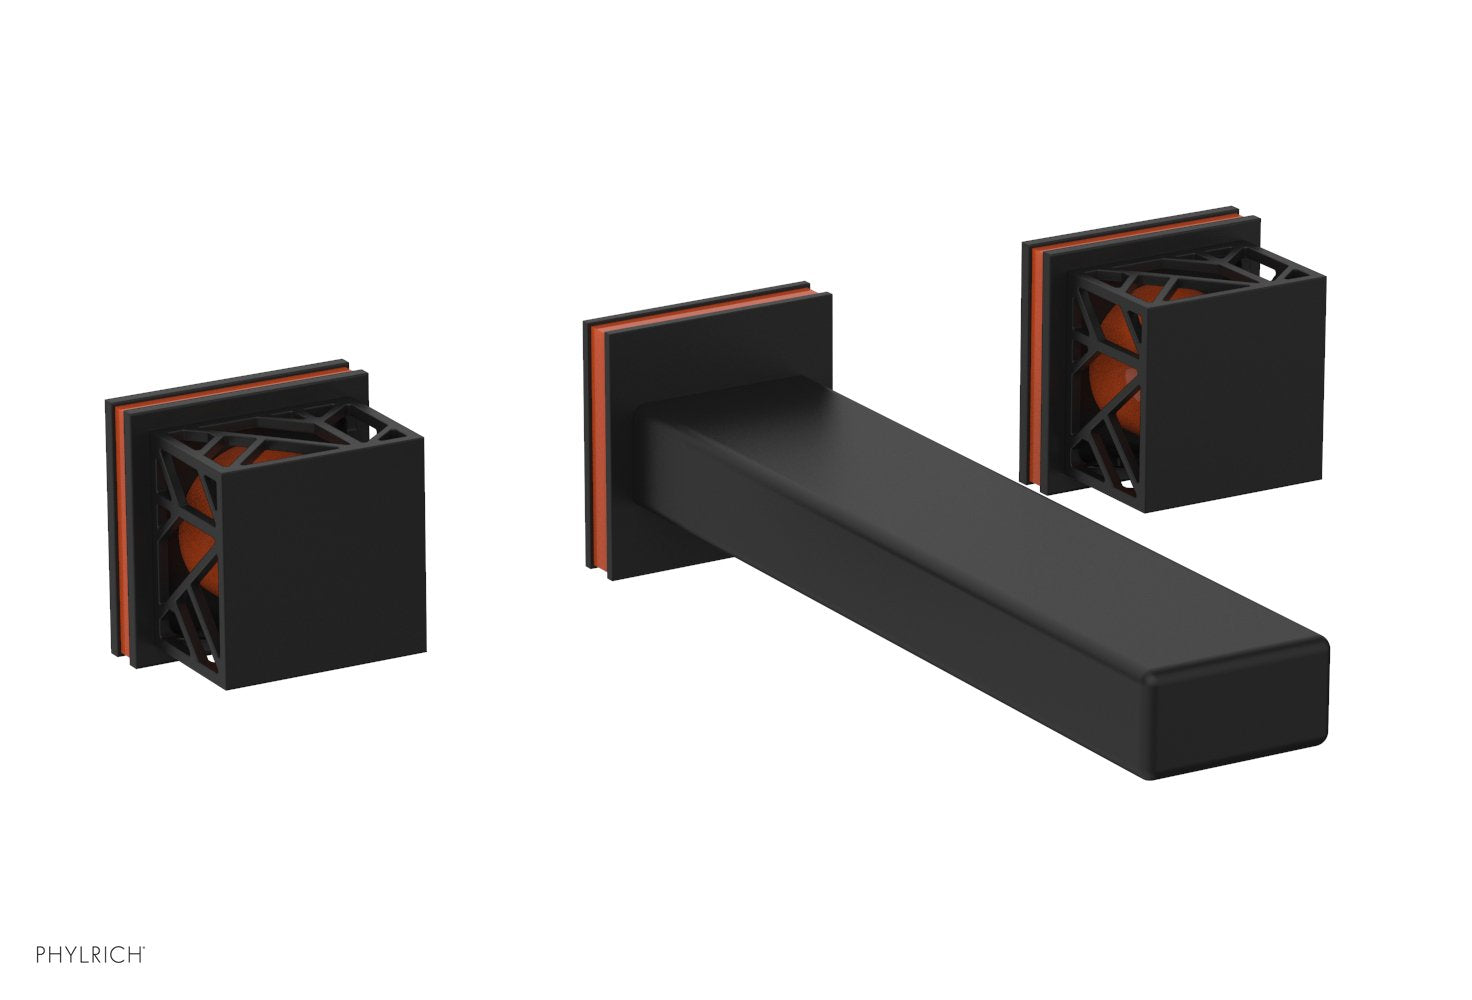 Phylrich JOLIE Wall Lavatory Set - Square Handles with "Orange" Accents